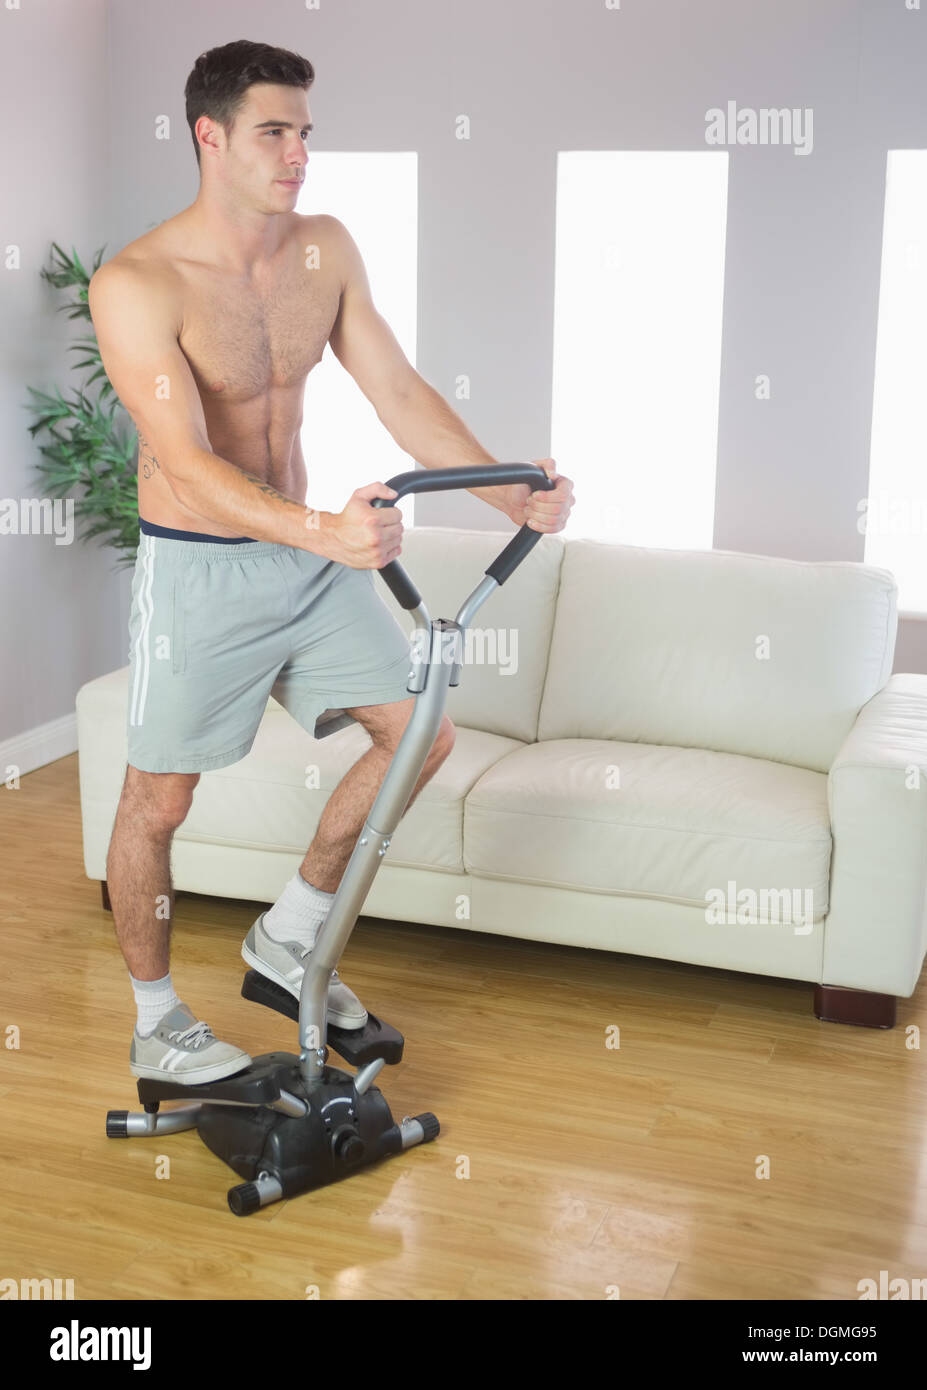 Serious handsome man training on stair climber Stock Photo